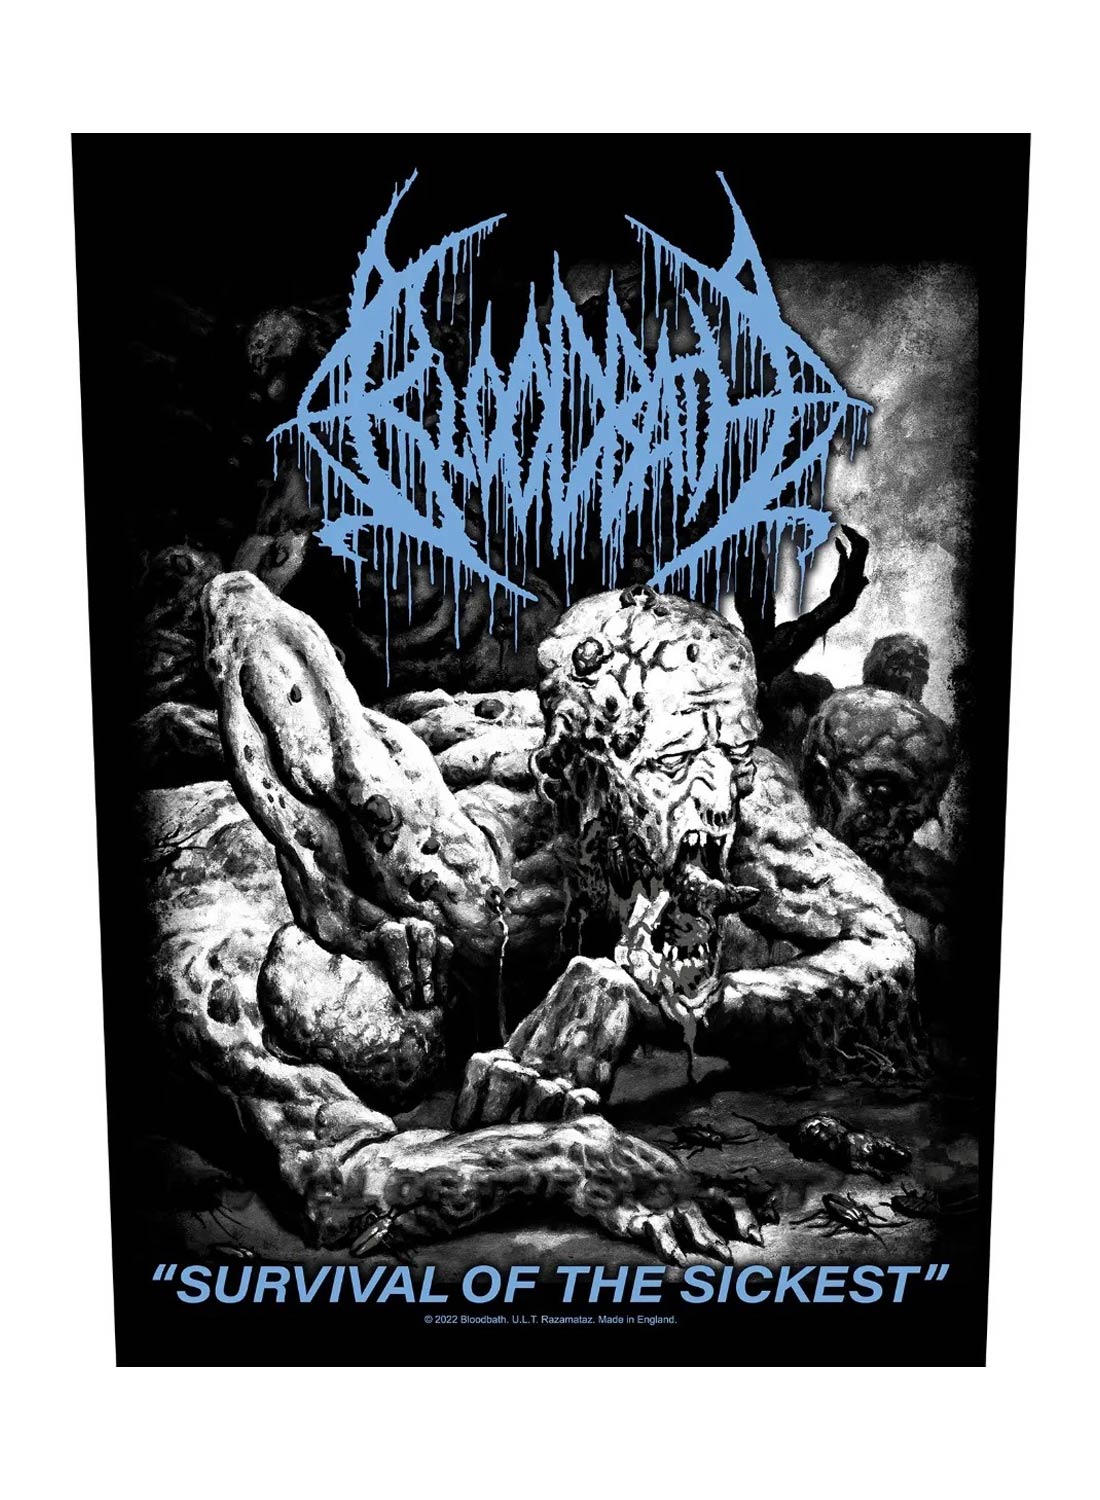 Bloodbath Survival Of The Sickest Back Patch